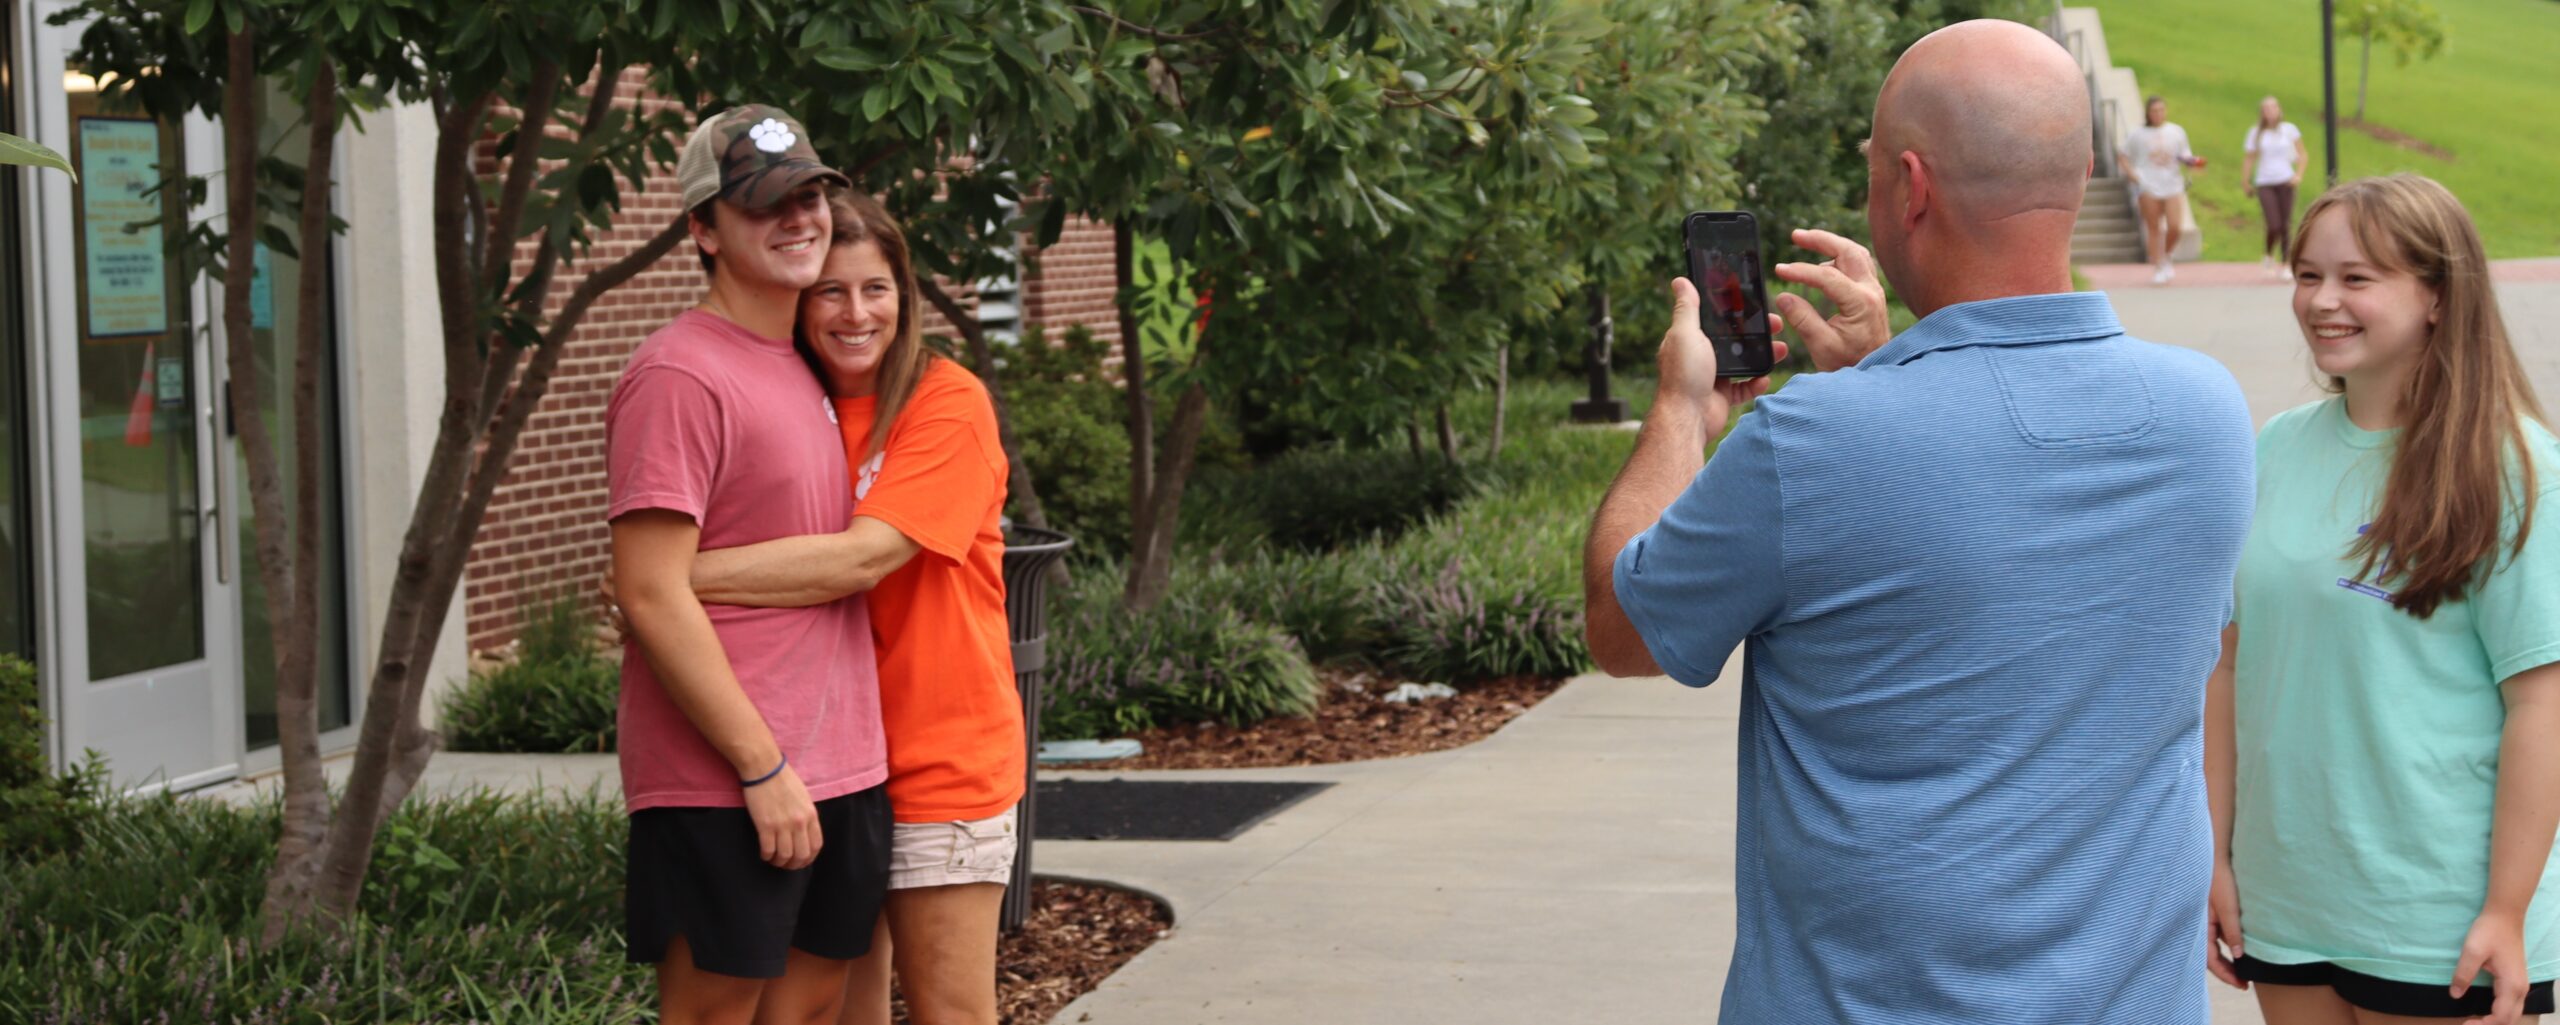 Father taking photo of son with his mother at move-in